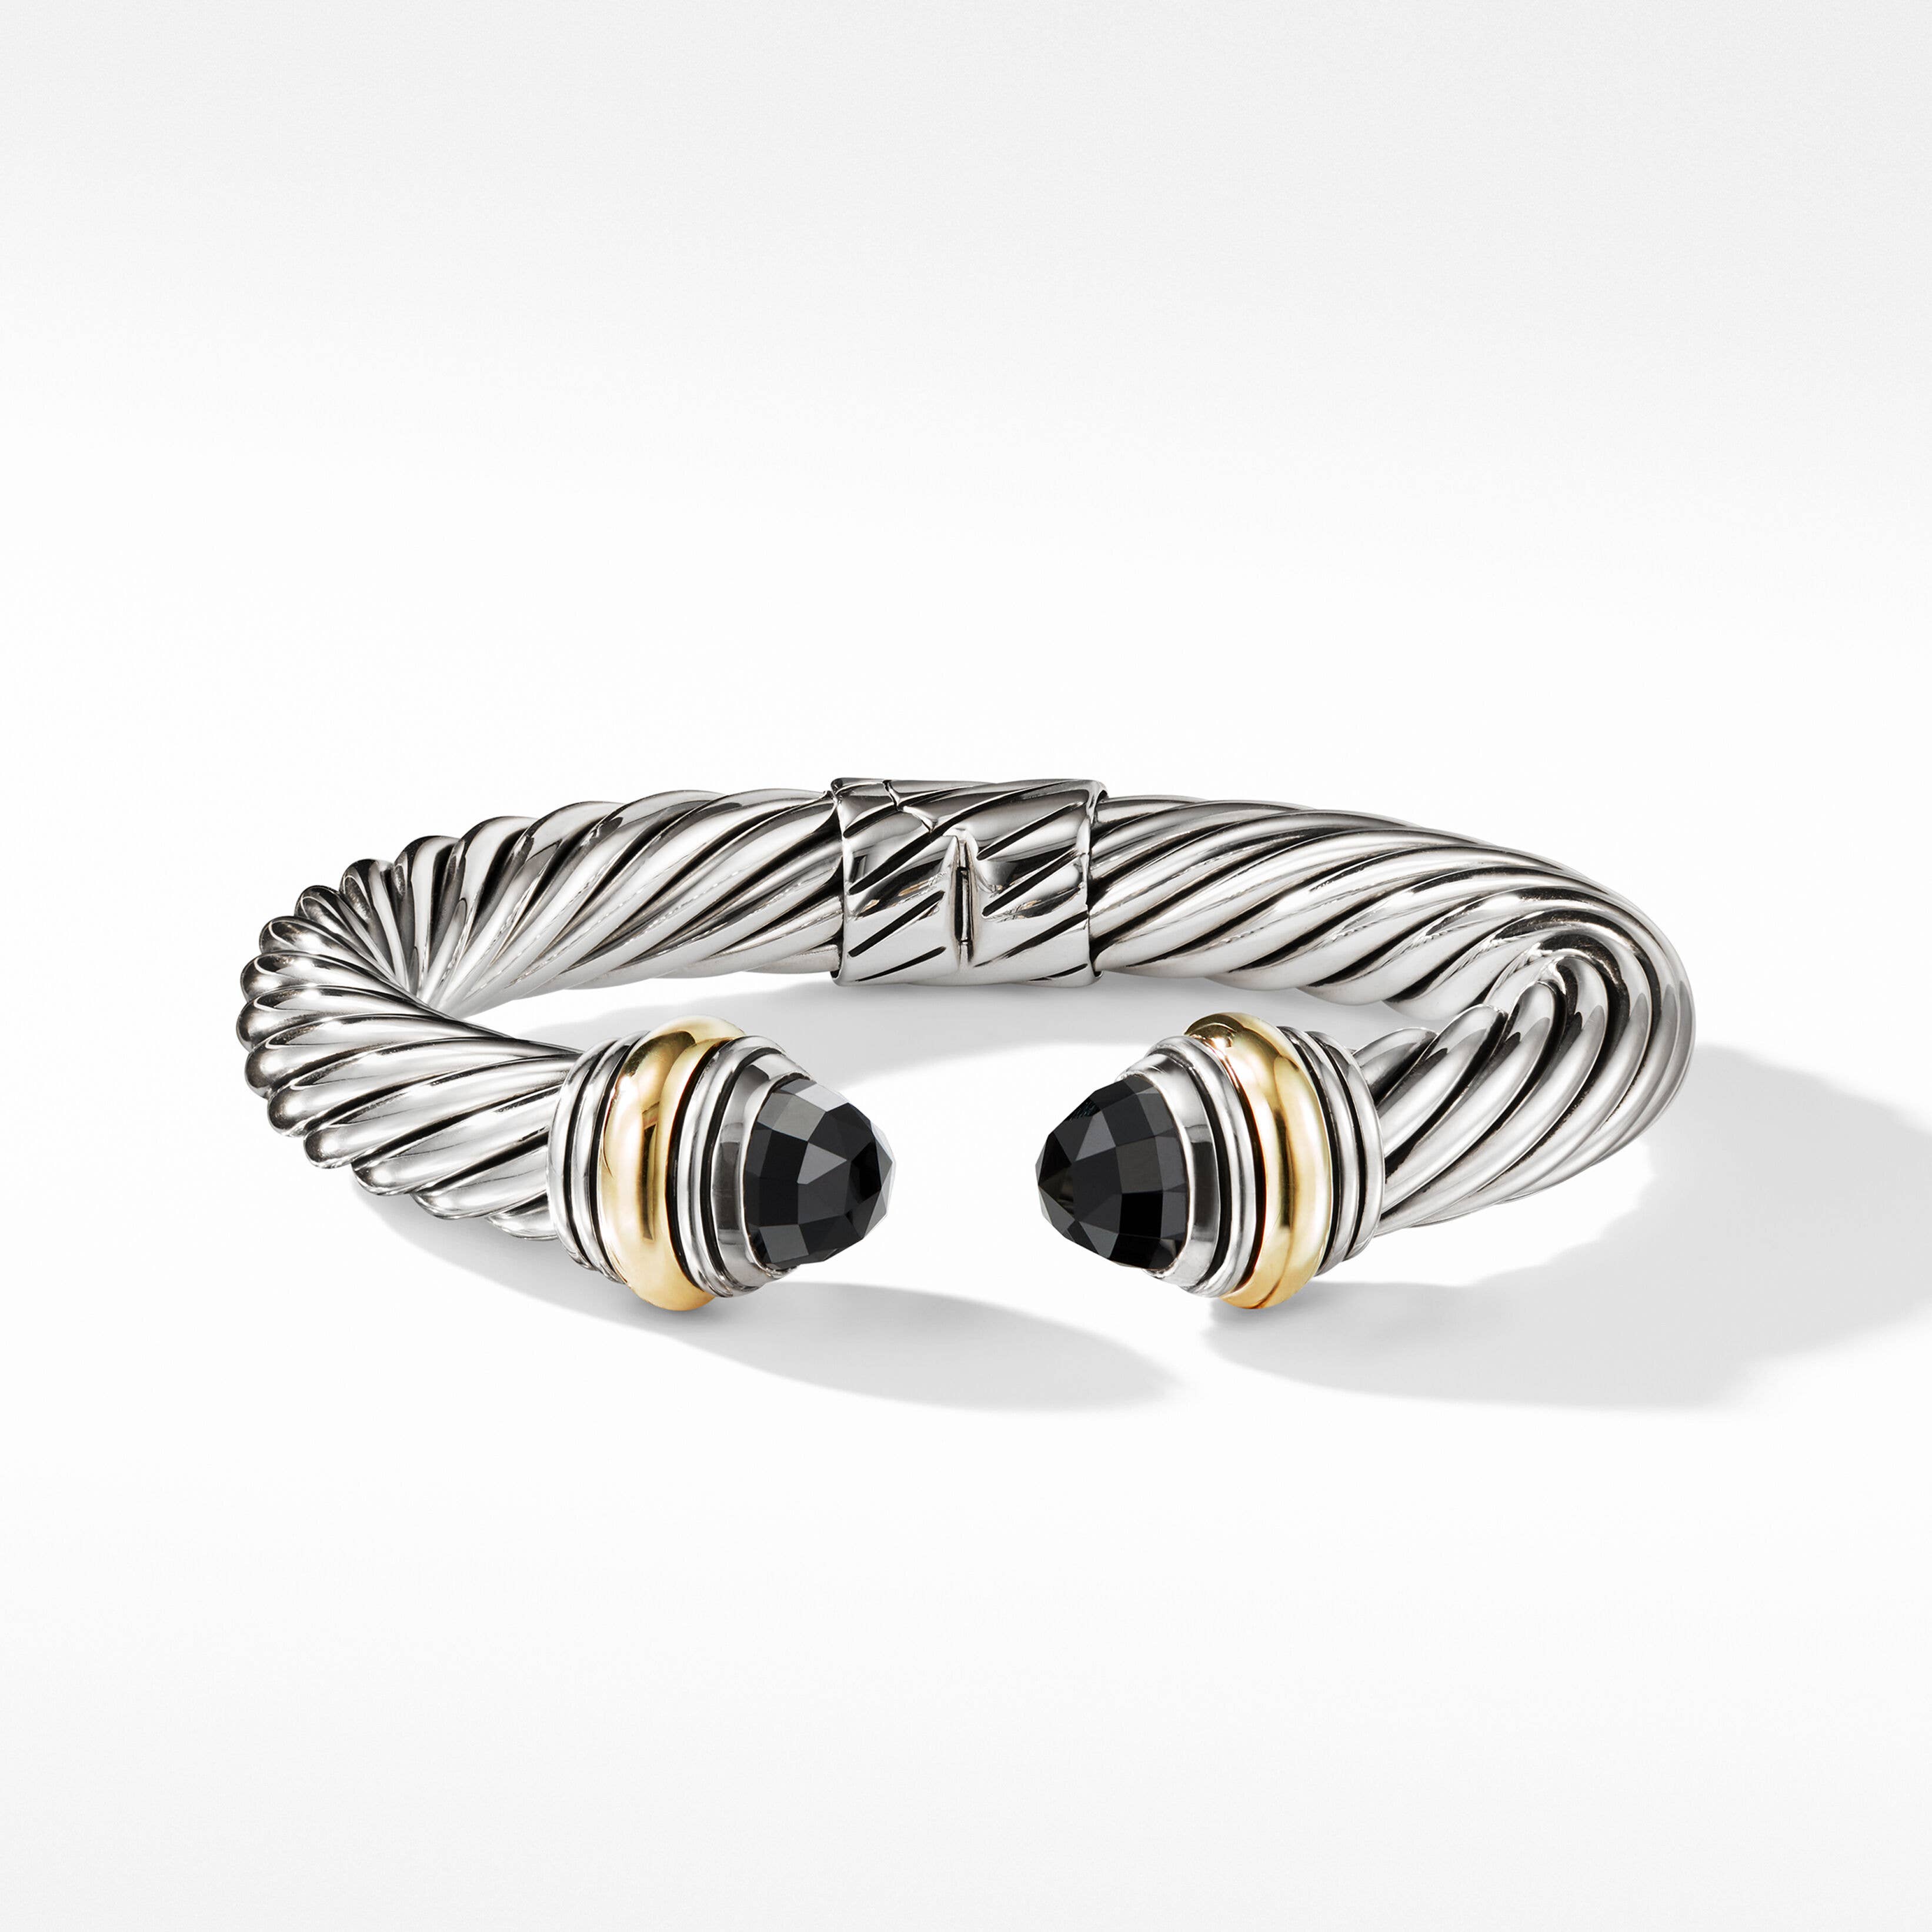 Cable Classics Color Bracelet in Sterling Silver with Black Onyx and 14K Yellow Gold